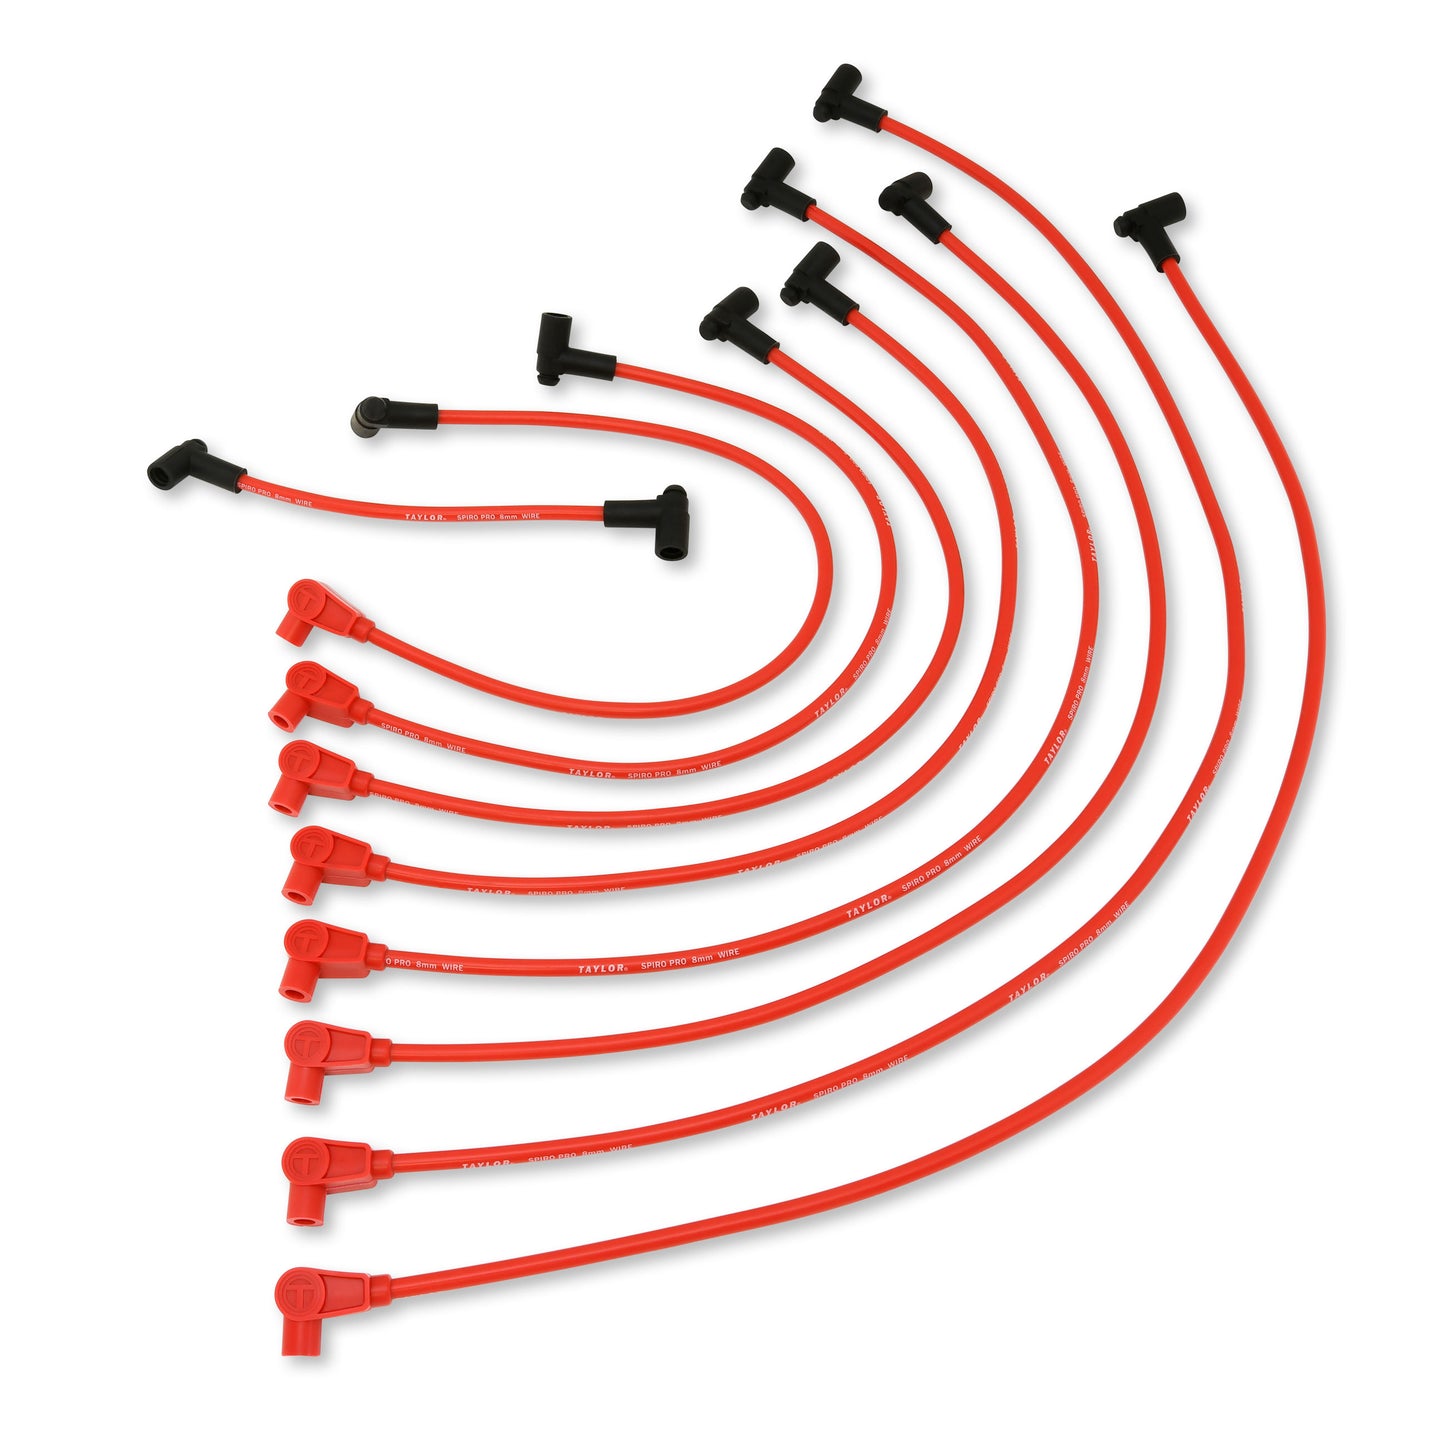 Taylor Cable 79201 10.4mm 409 Spiro Pro Race Fit Spark Plug Wires 90° Red